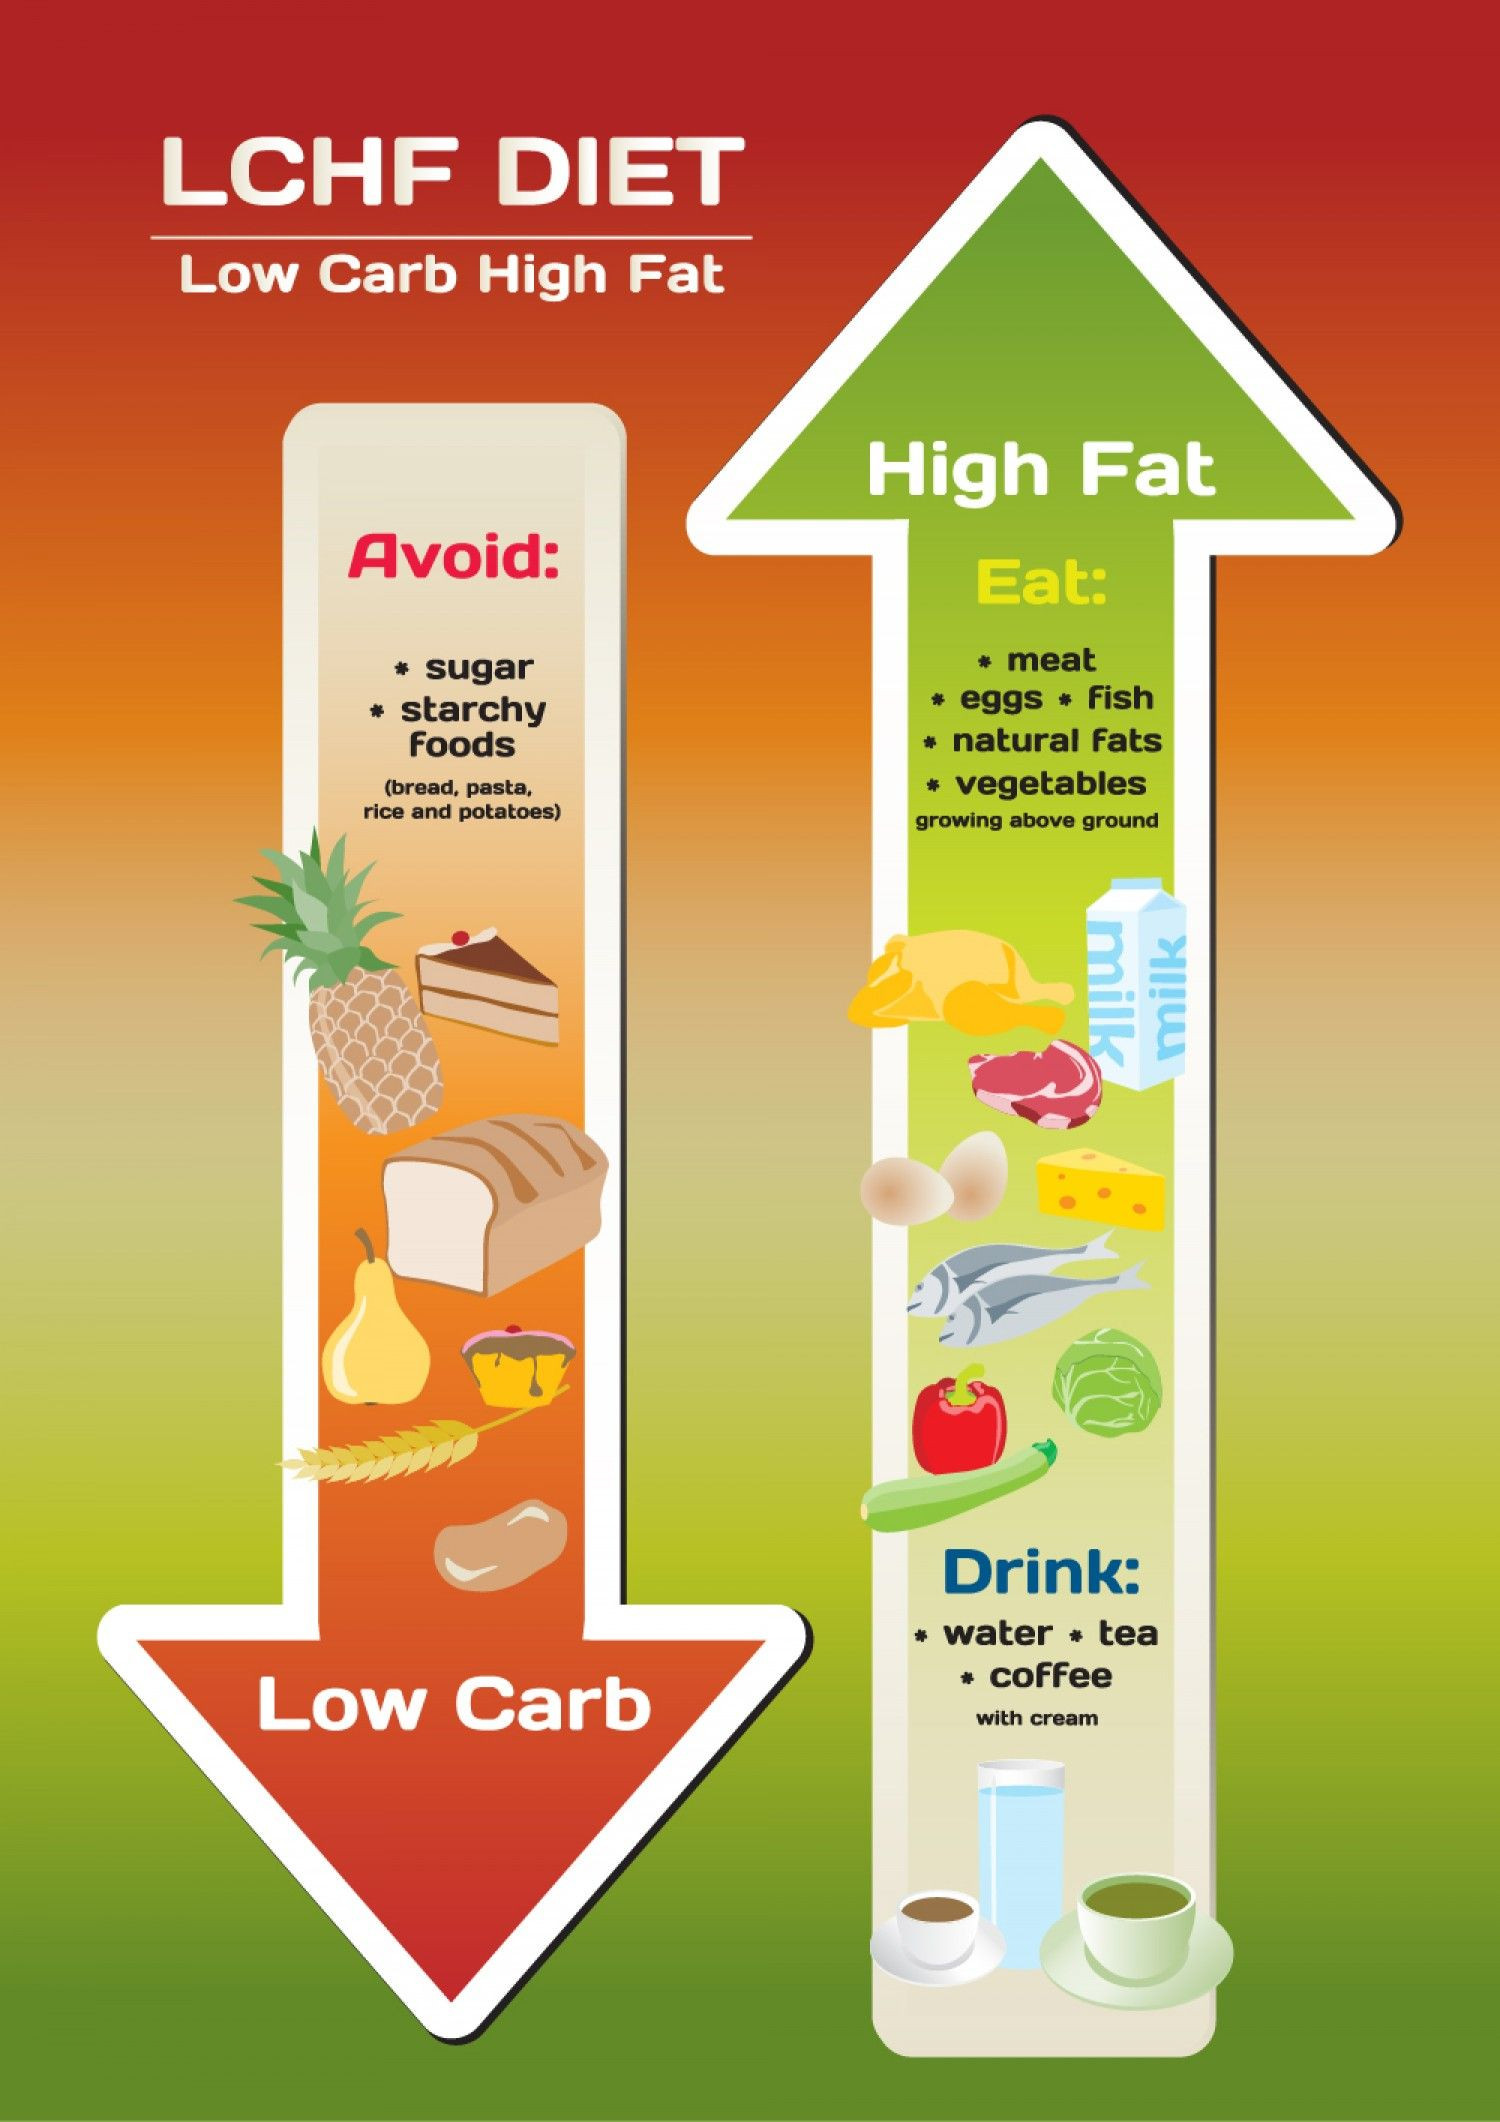 High Carb Low Fat Diet
 The LCHF Diet Infographic